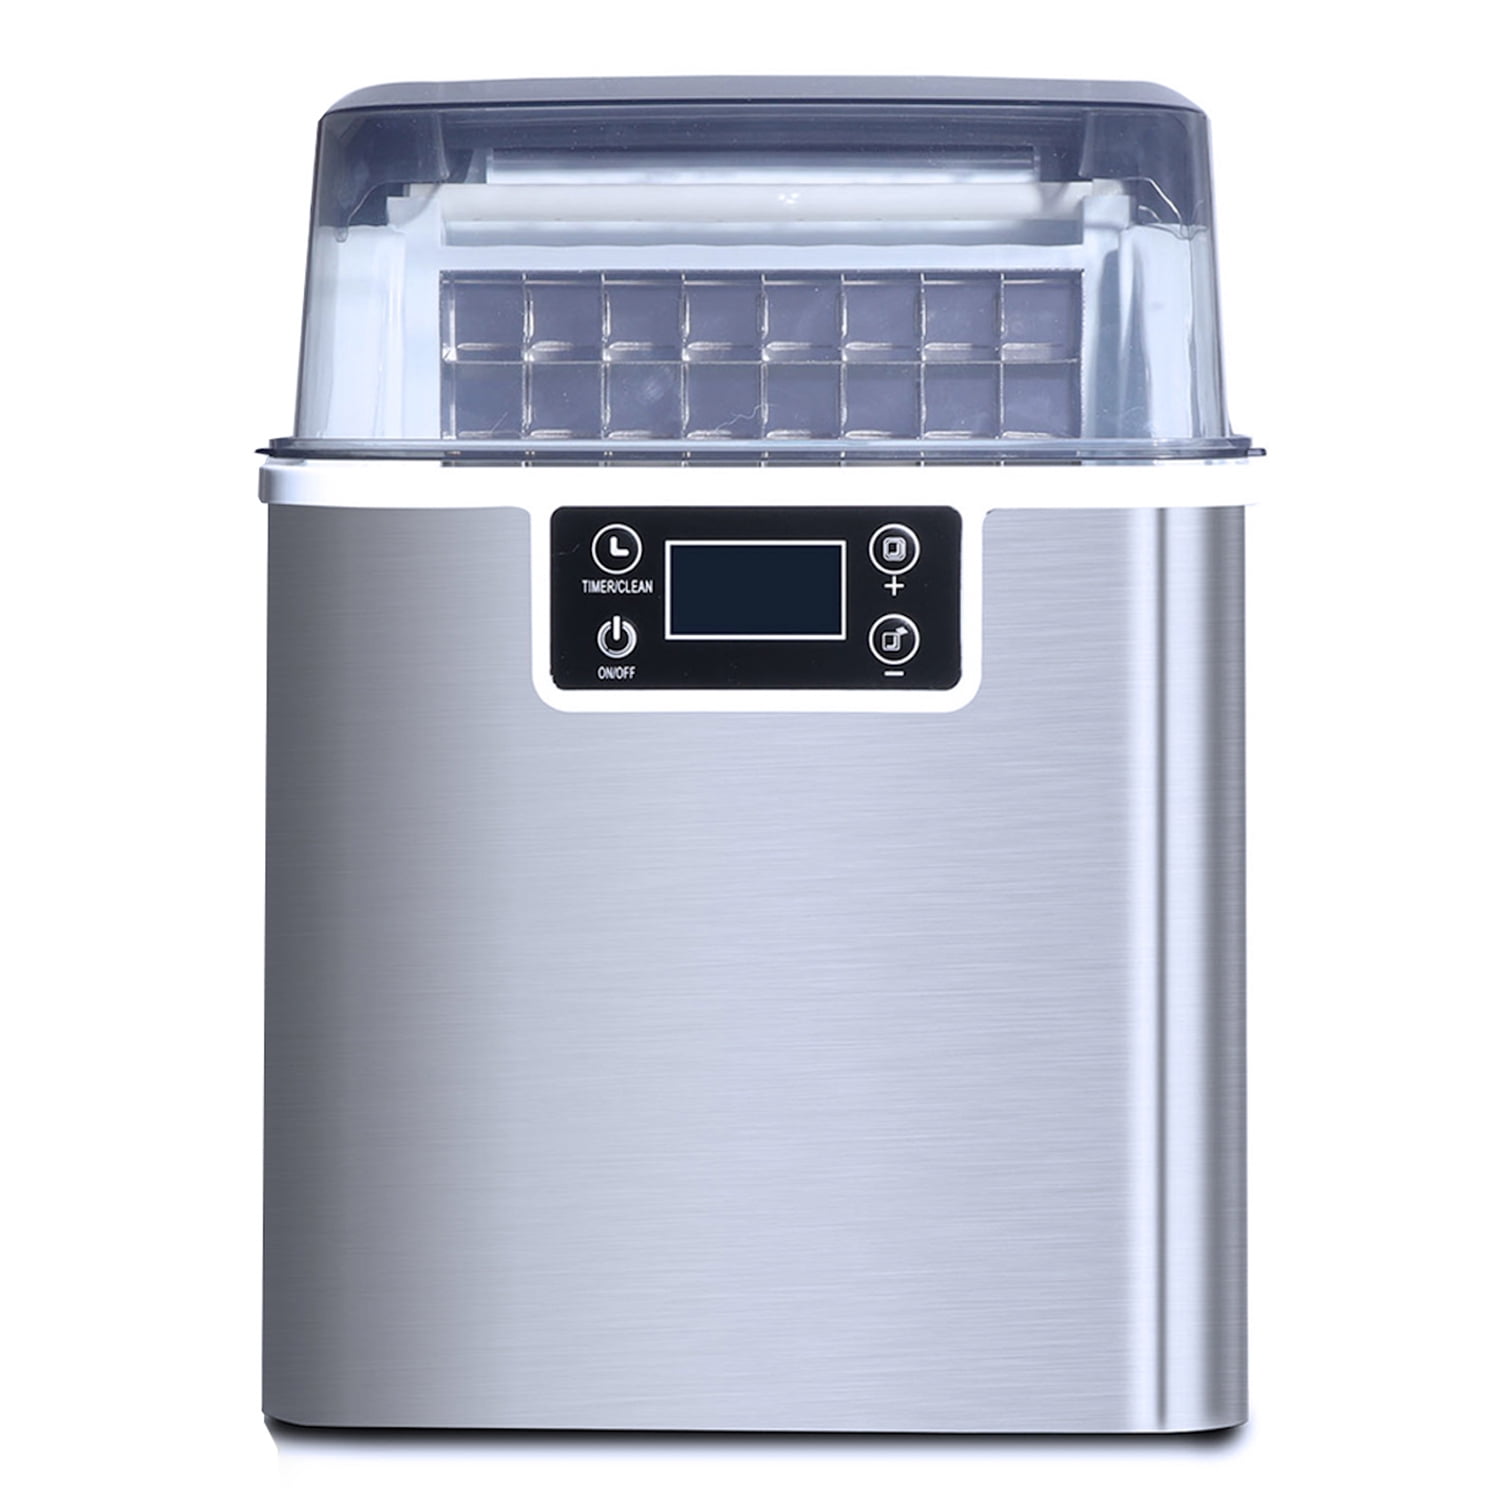 Euhomy IM-F Countertop Auto Self Cleaning Portable Ice Maker W Basket Silver